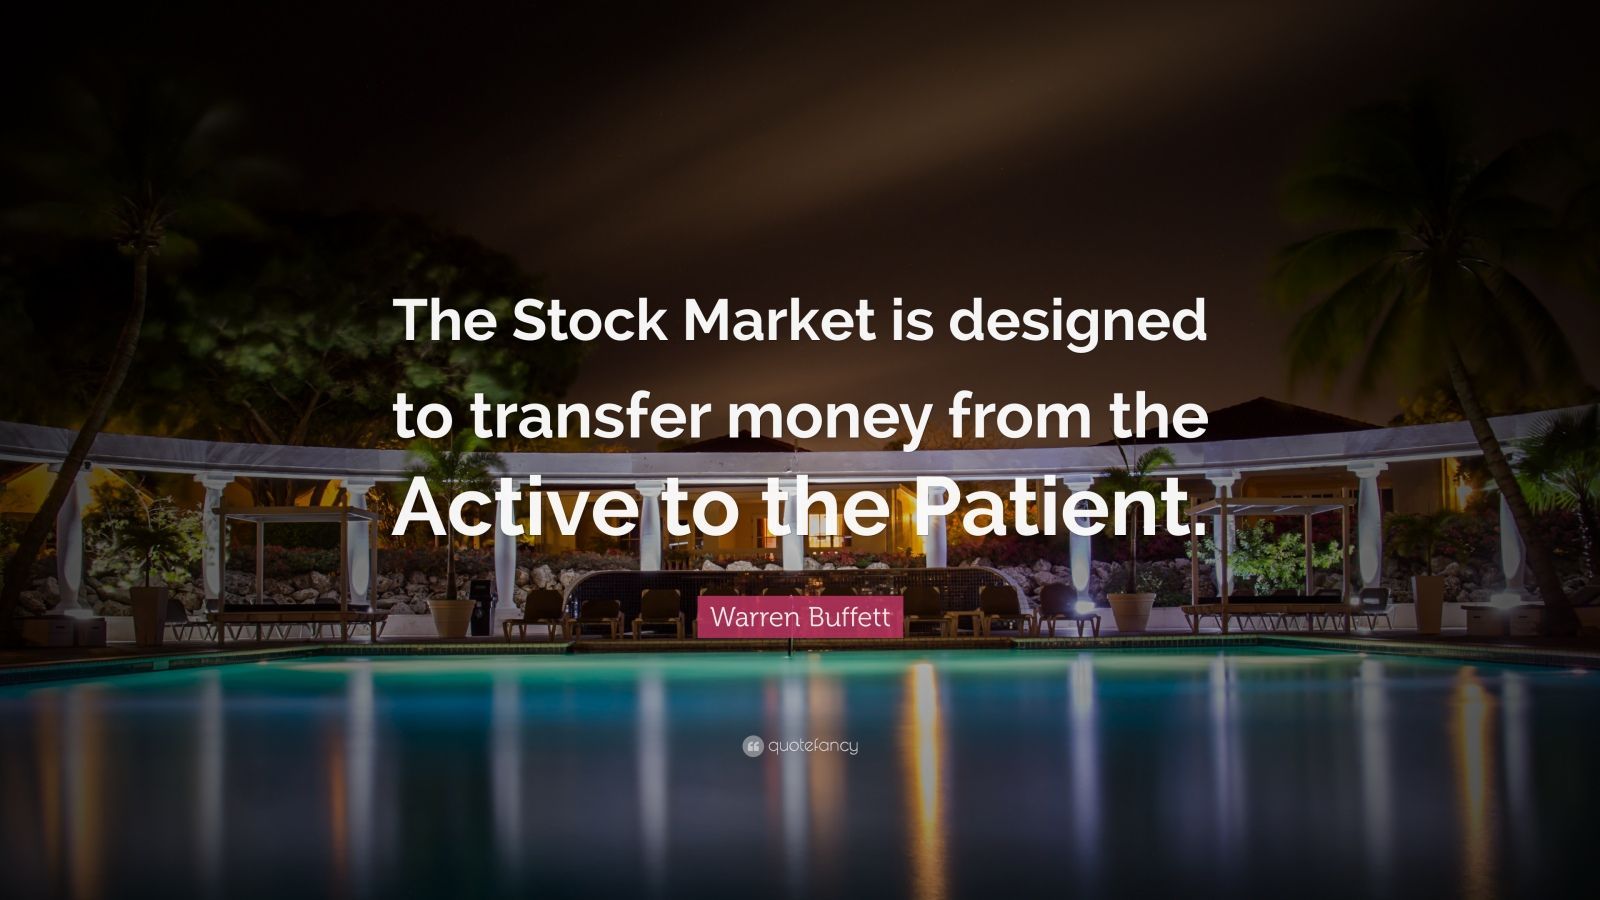 Warren Buffett Quote: “The Stock Market is designed to transfer money from the Active to the Patient.” (12 wallpaper)